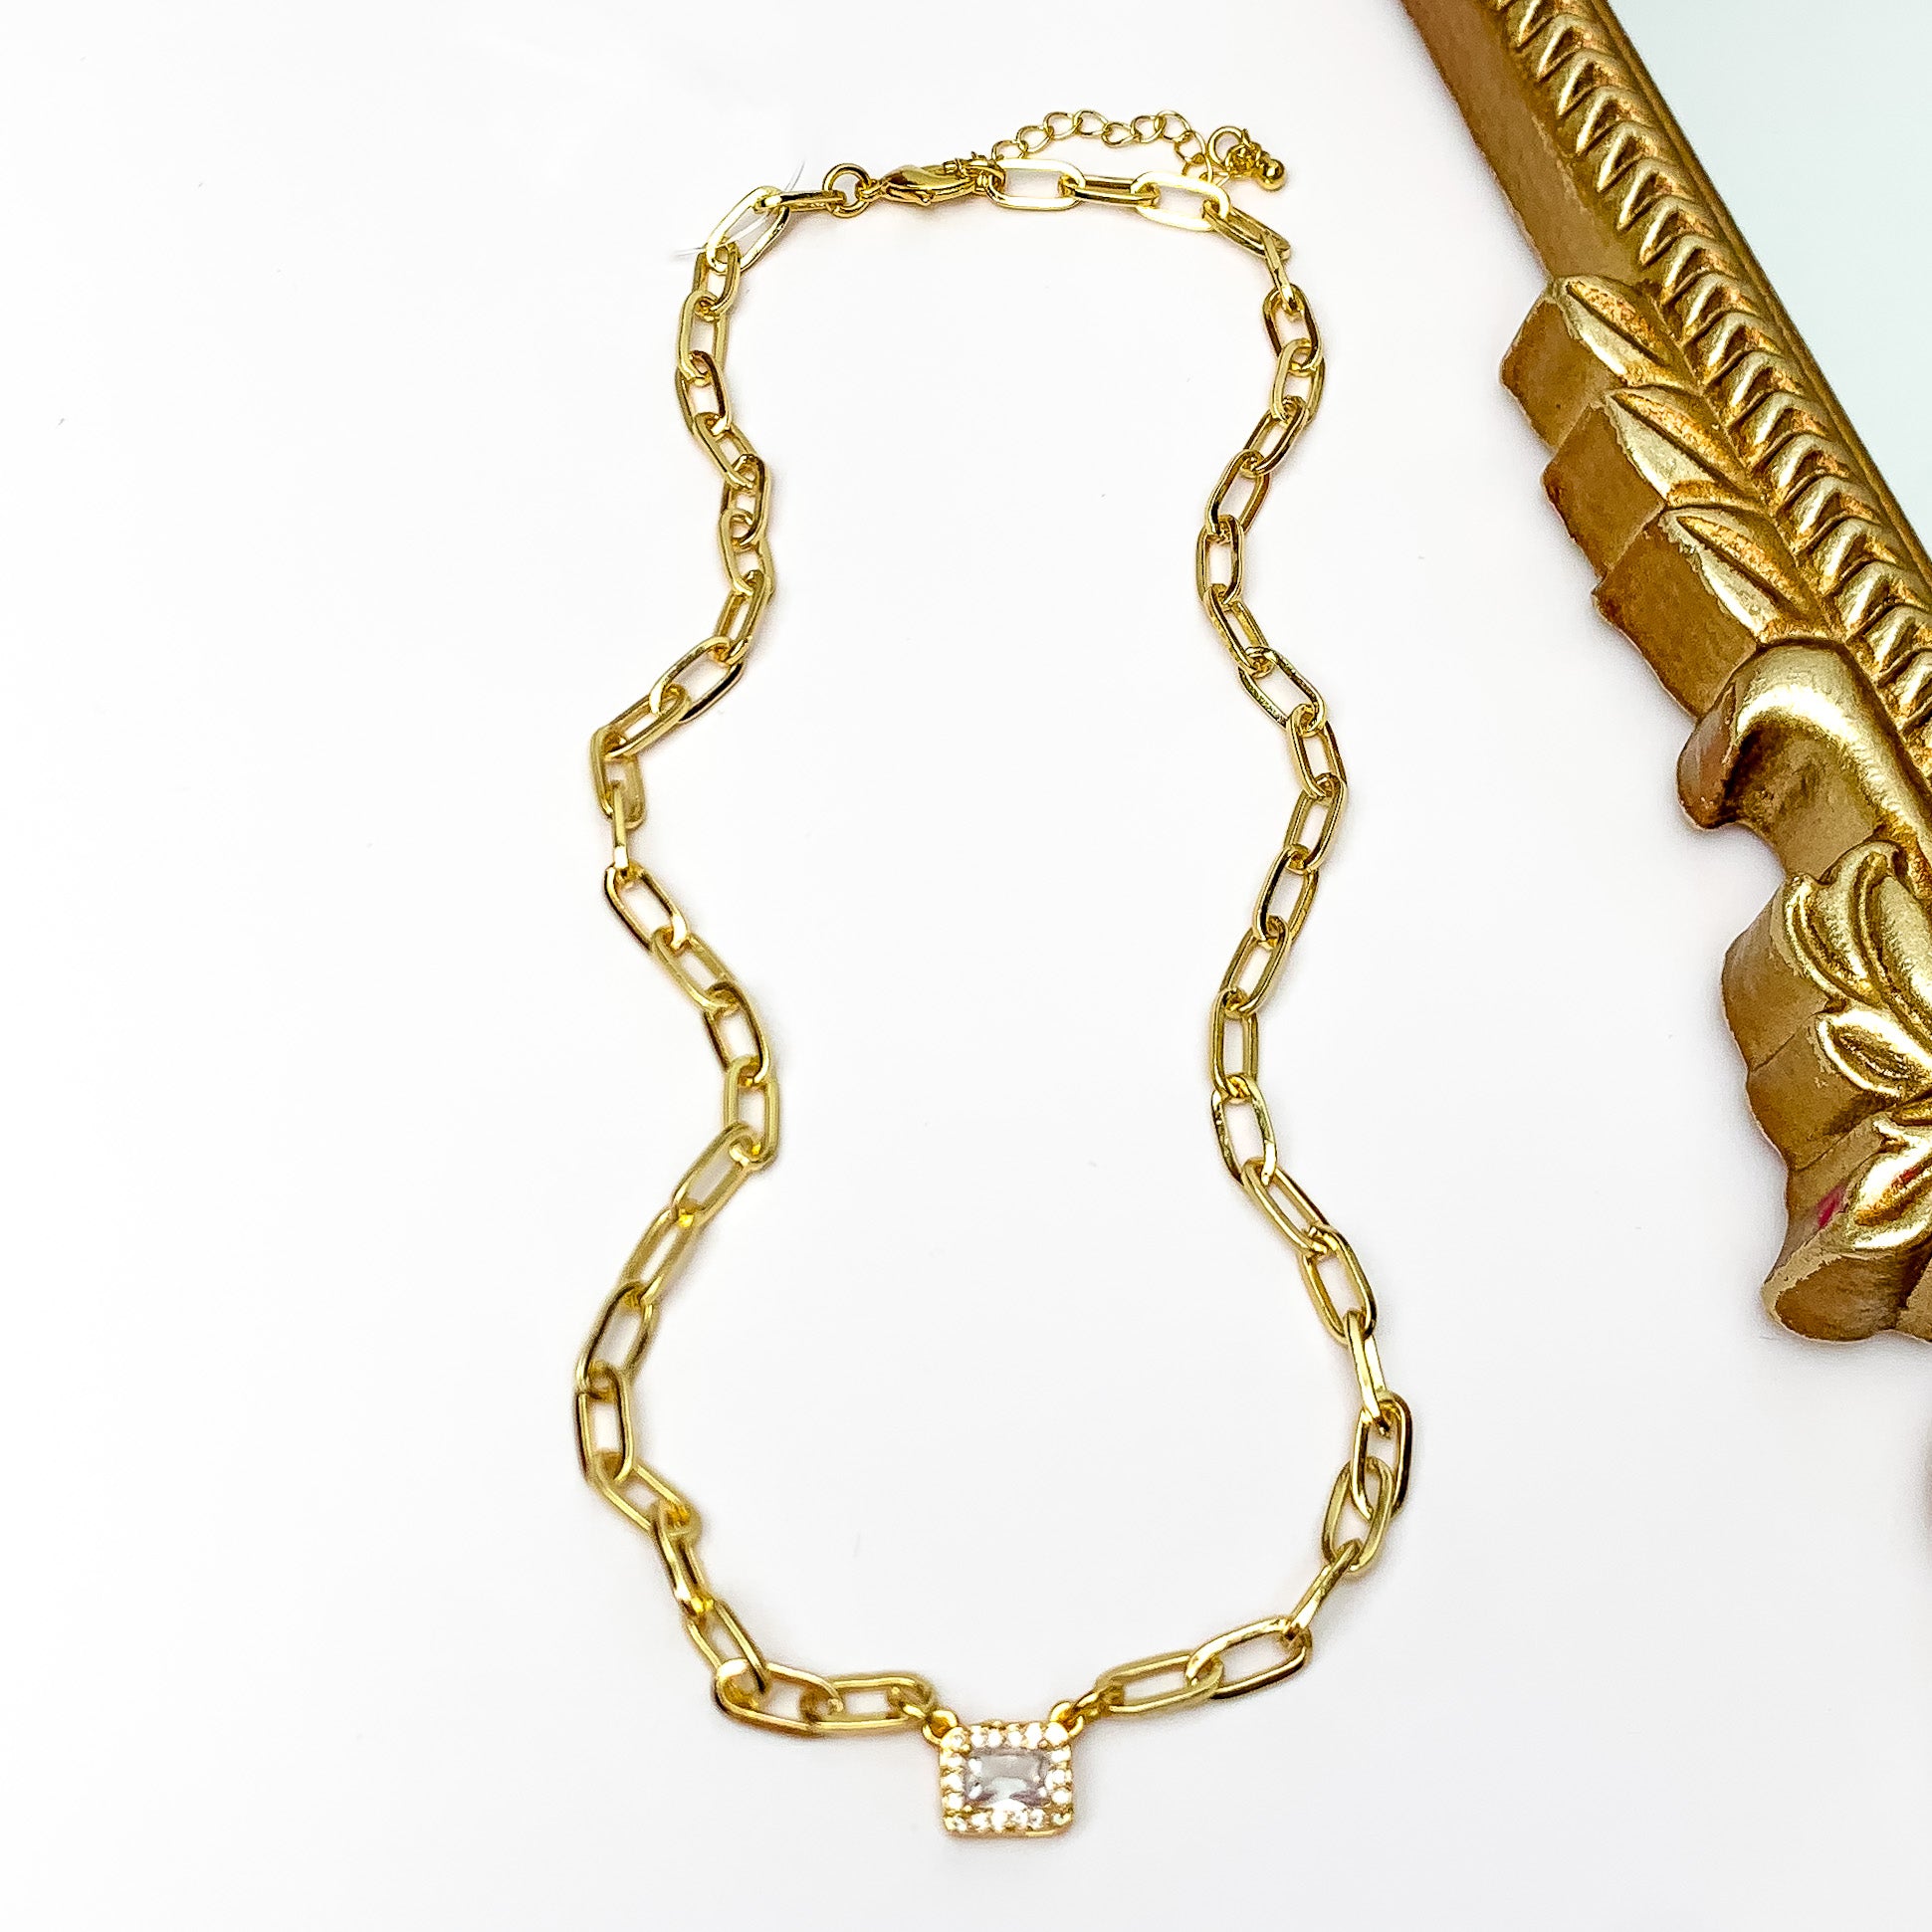 Pictured is a gold chain necklace with a rectangle pendant with clear crystals. This necklace is pictured on a white background with a gold mirror in the top right corner.  